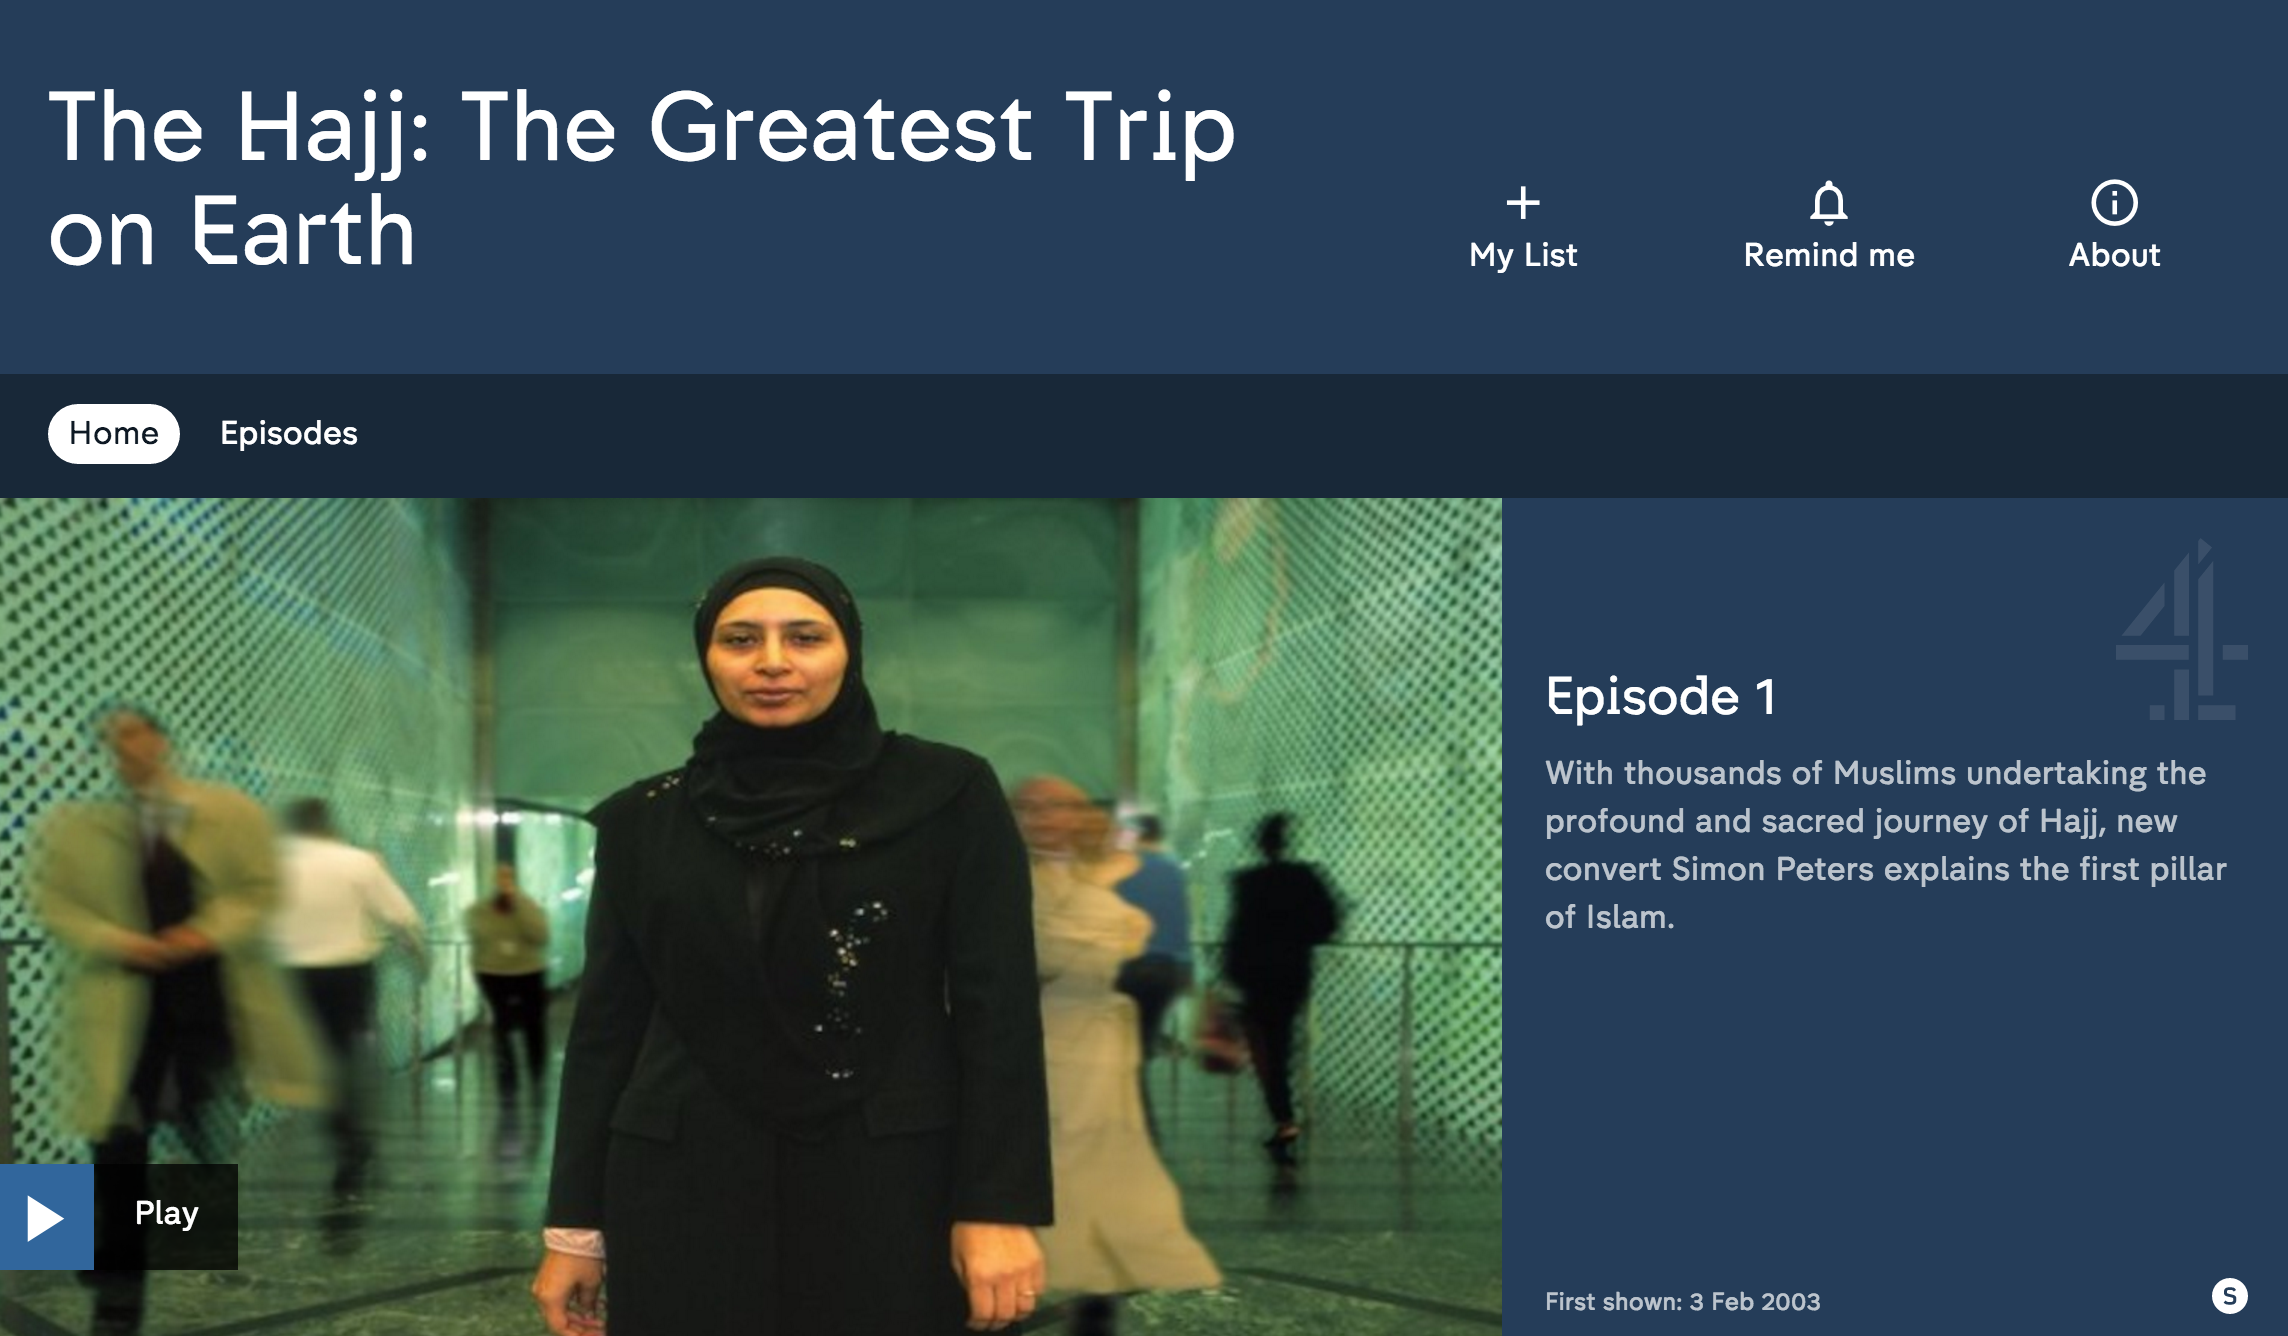 The Hajj: The Greatest Trip on Earth